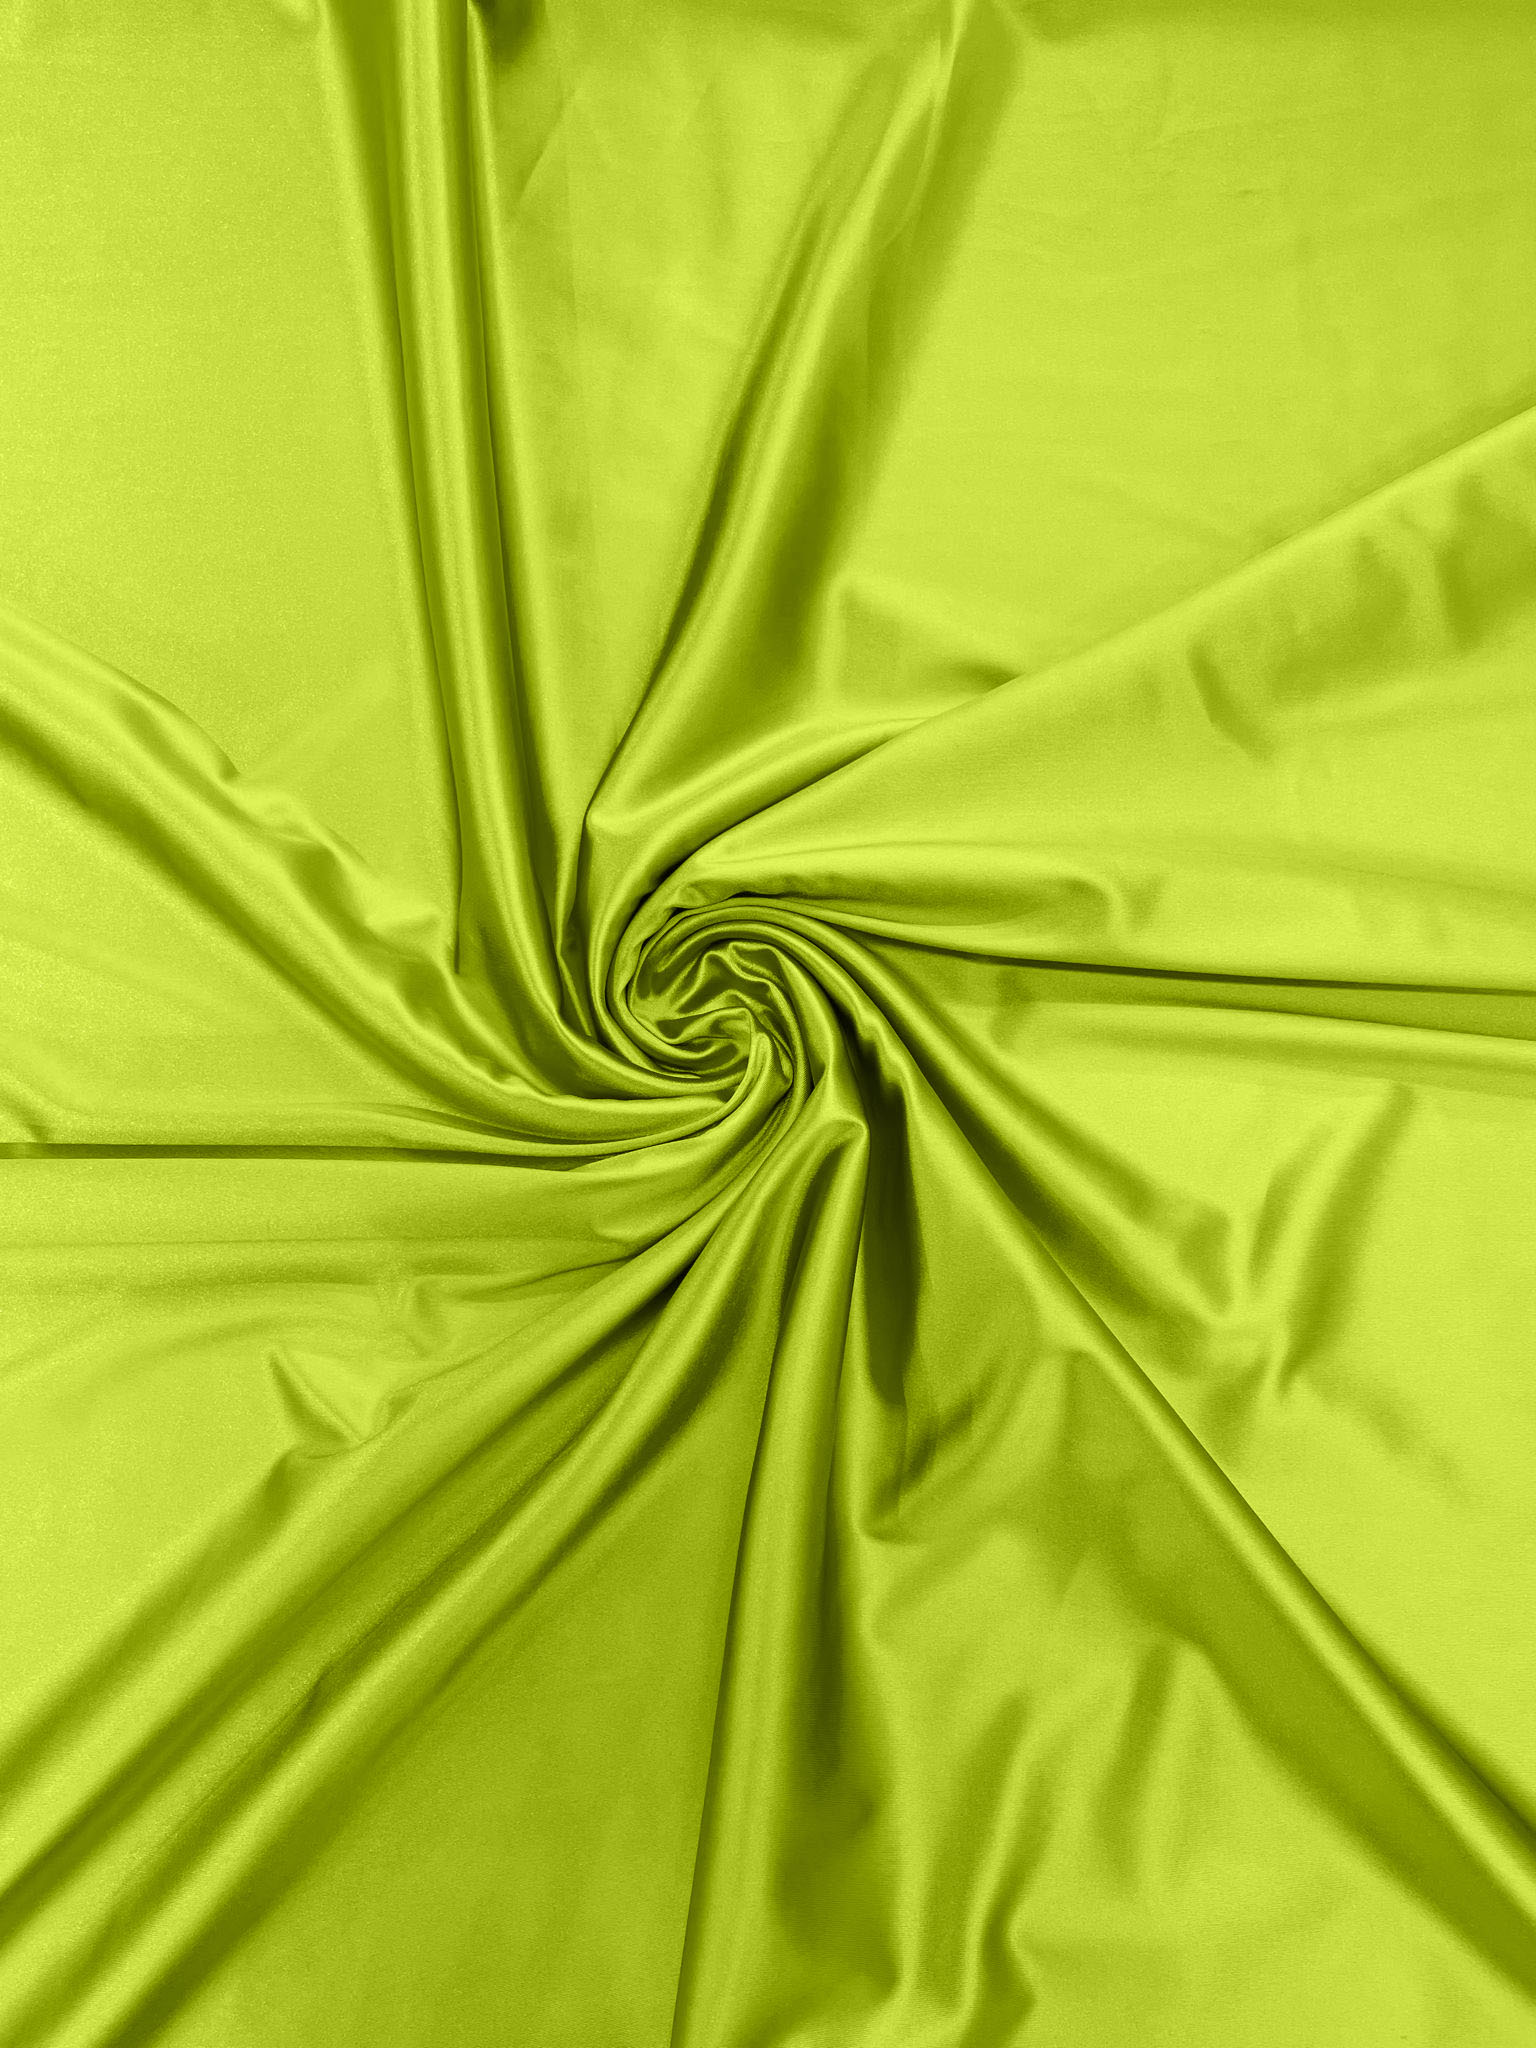 Neon Lime Heavy Shiny Satin Stretch Spandex Fabric/58 Inches Wide/Prom/Wedding/Cosplays.